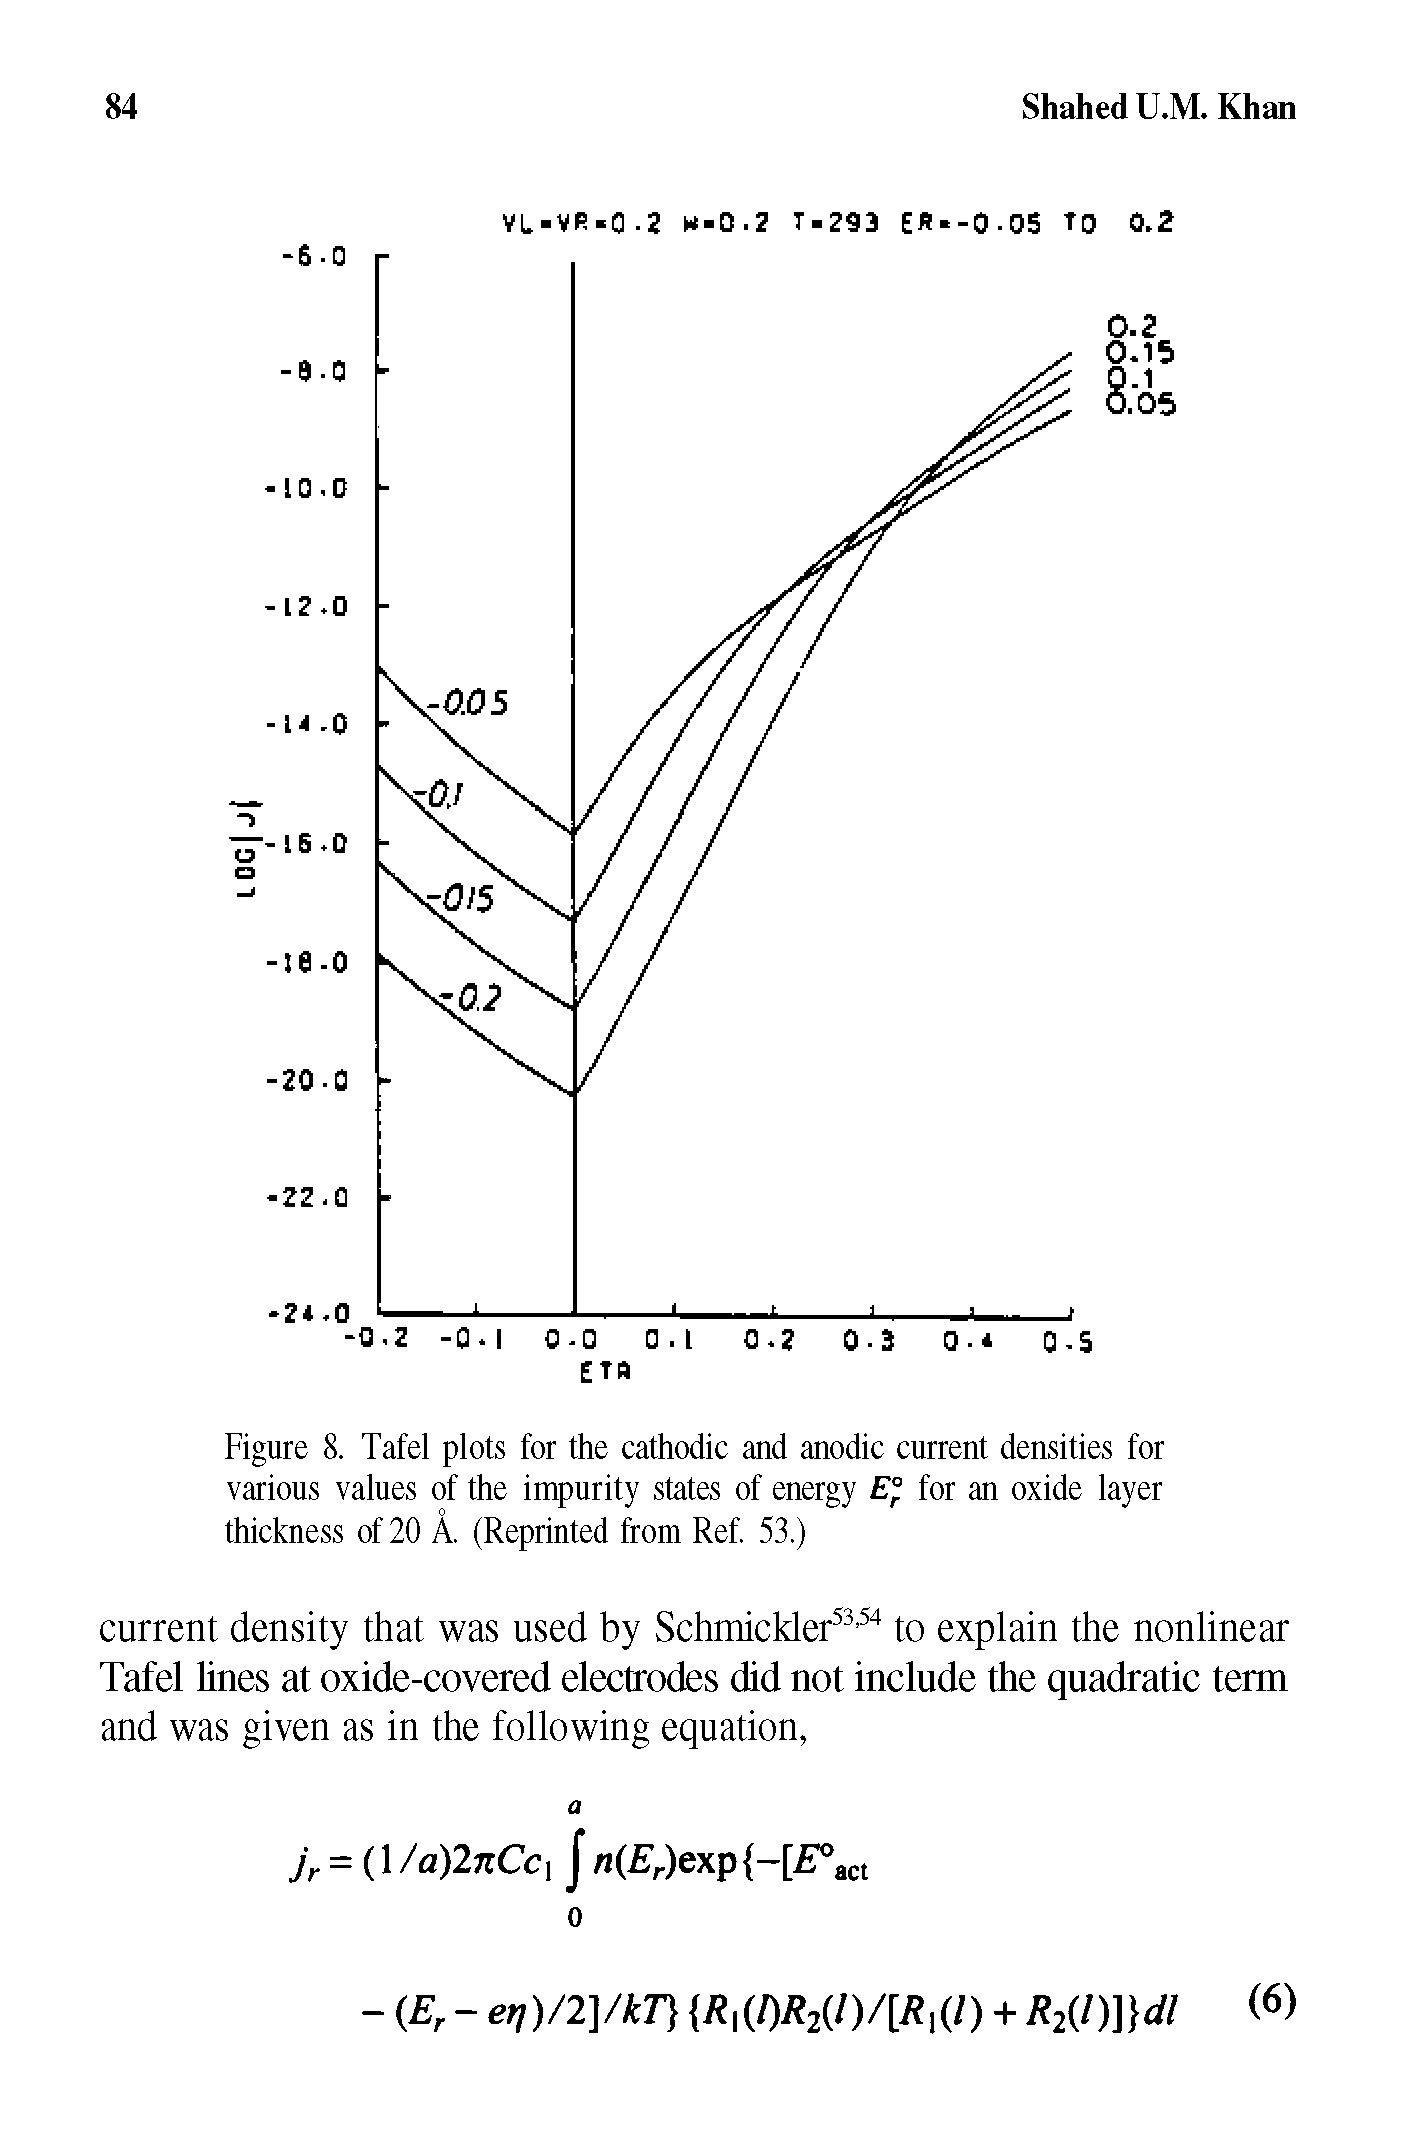 Figure 8. Tafel plots for the cathodic and anodic current densities for various values of the impurity states of energy E° for an oxide layer thickness of 20 A. (Reprinted from Ref 53.)...